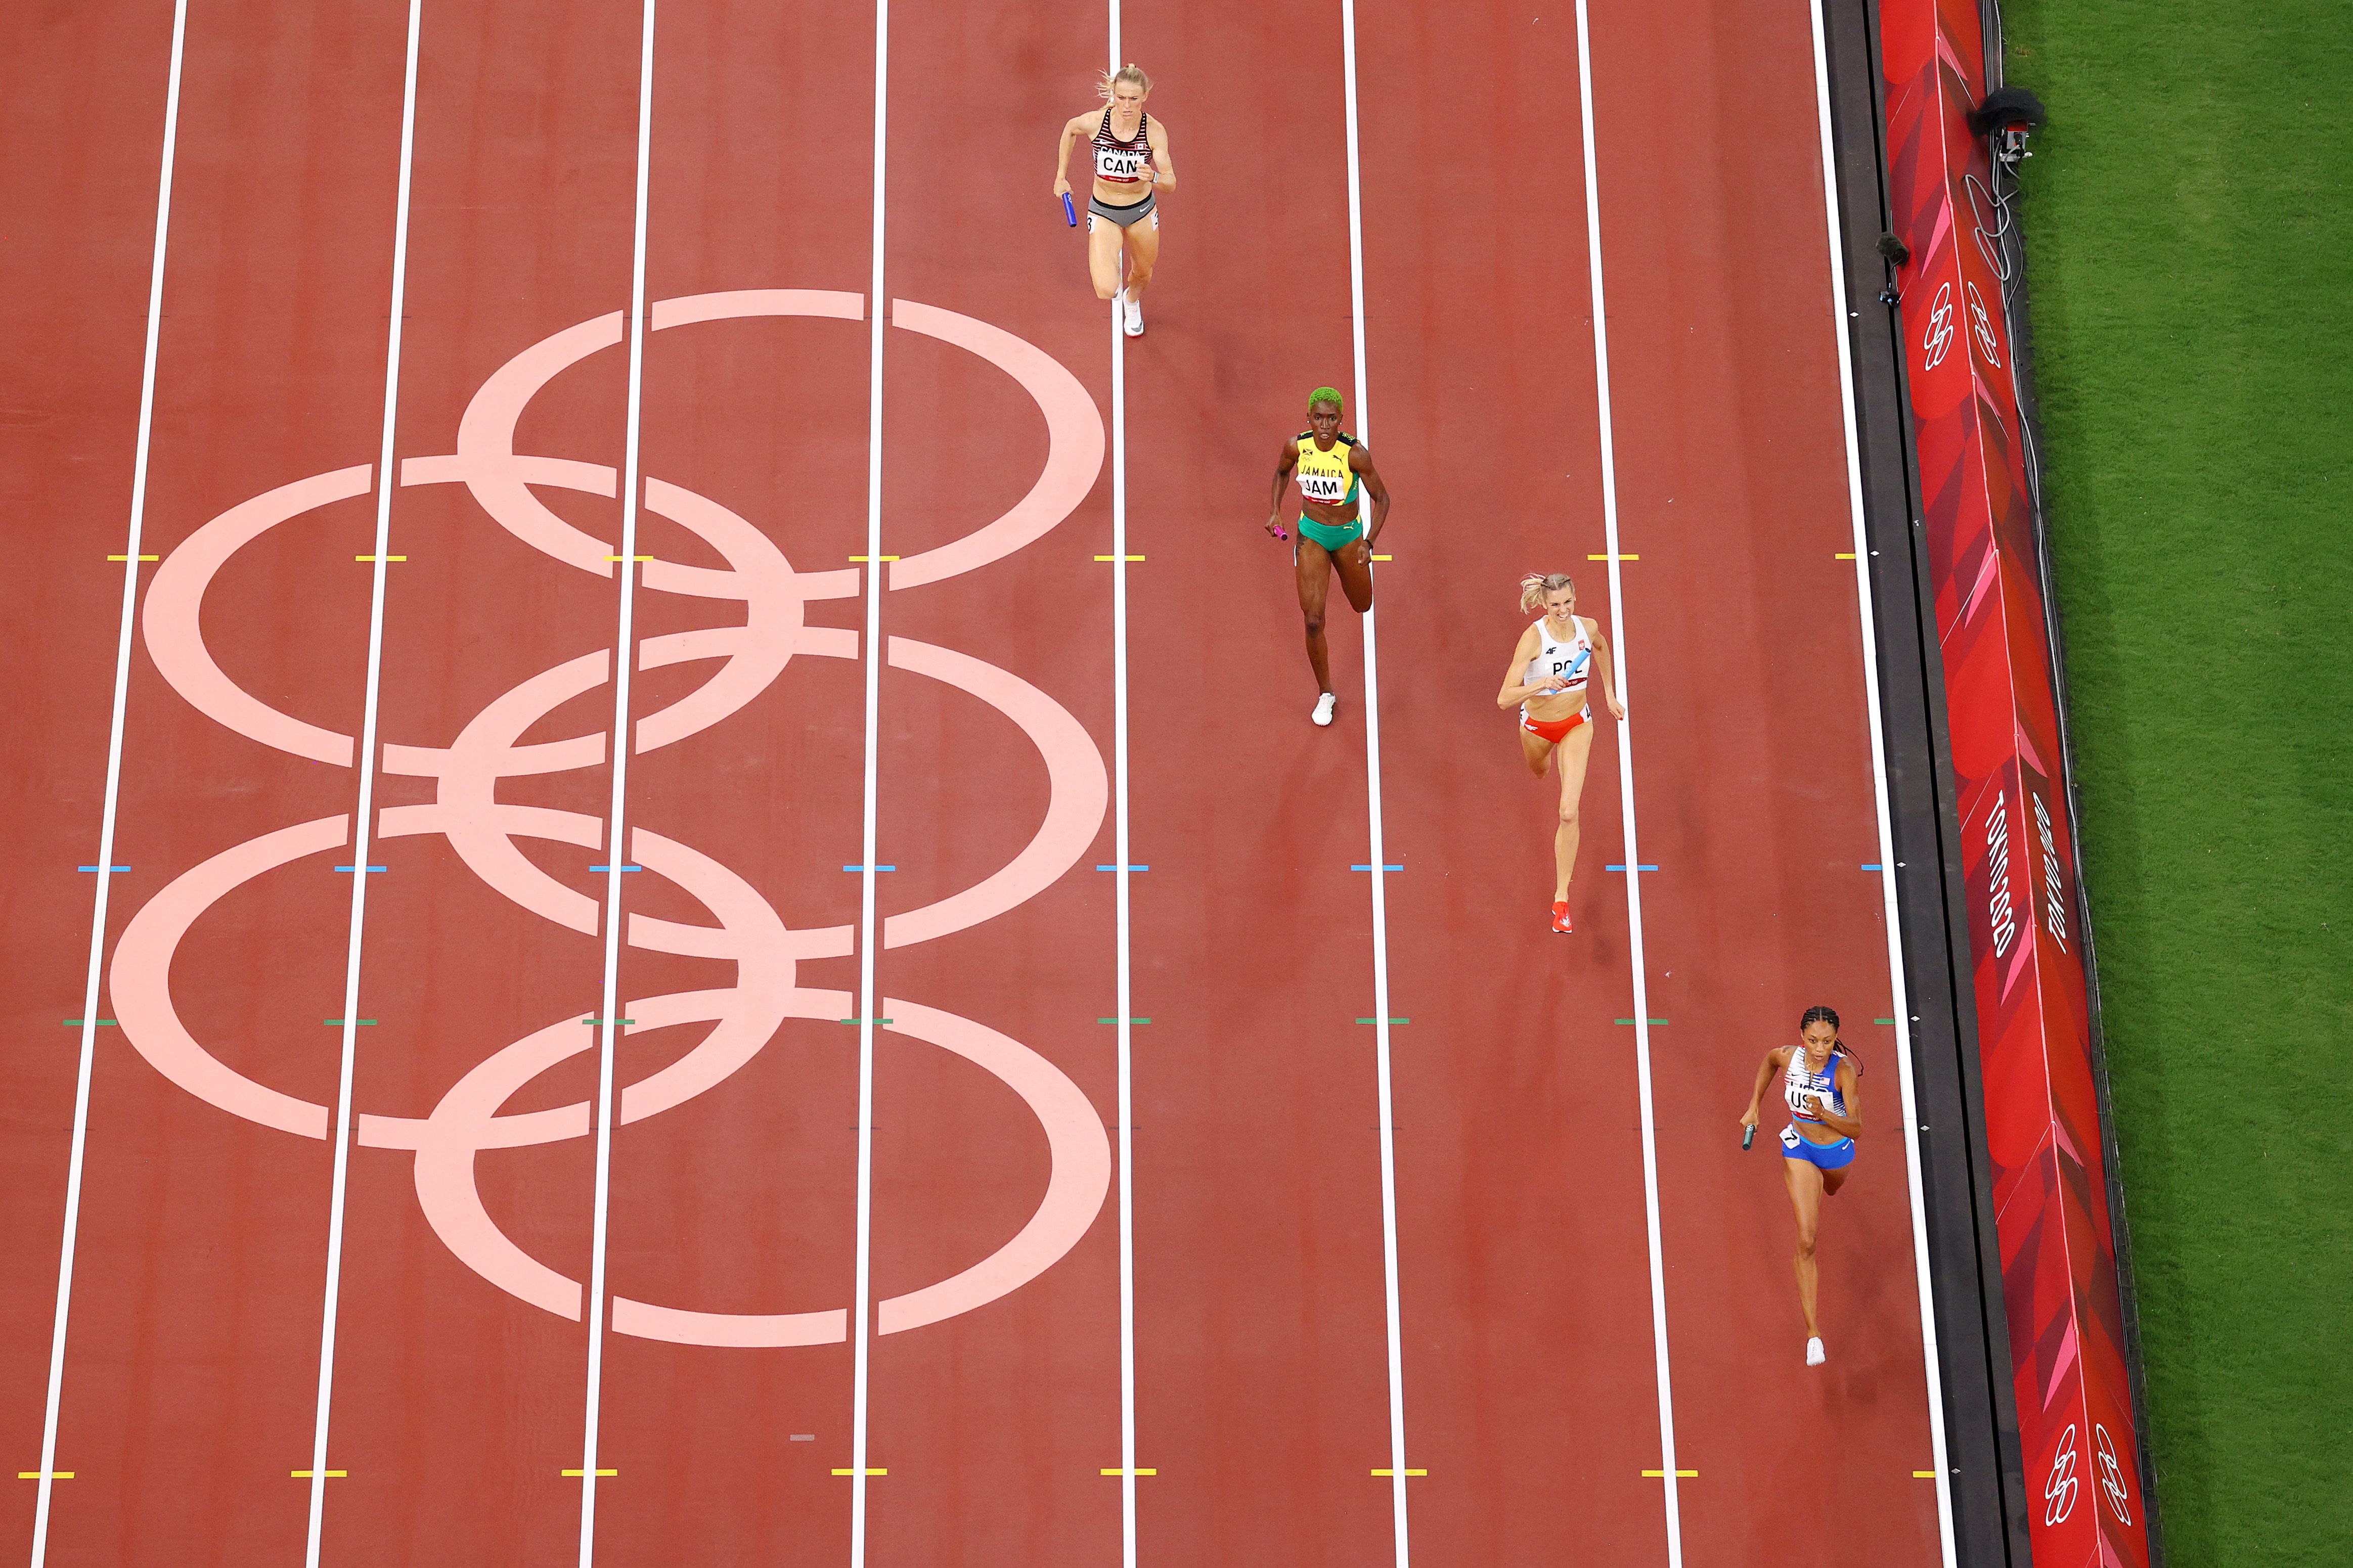 The greatest venues in outdoor track and field, according to you